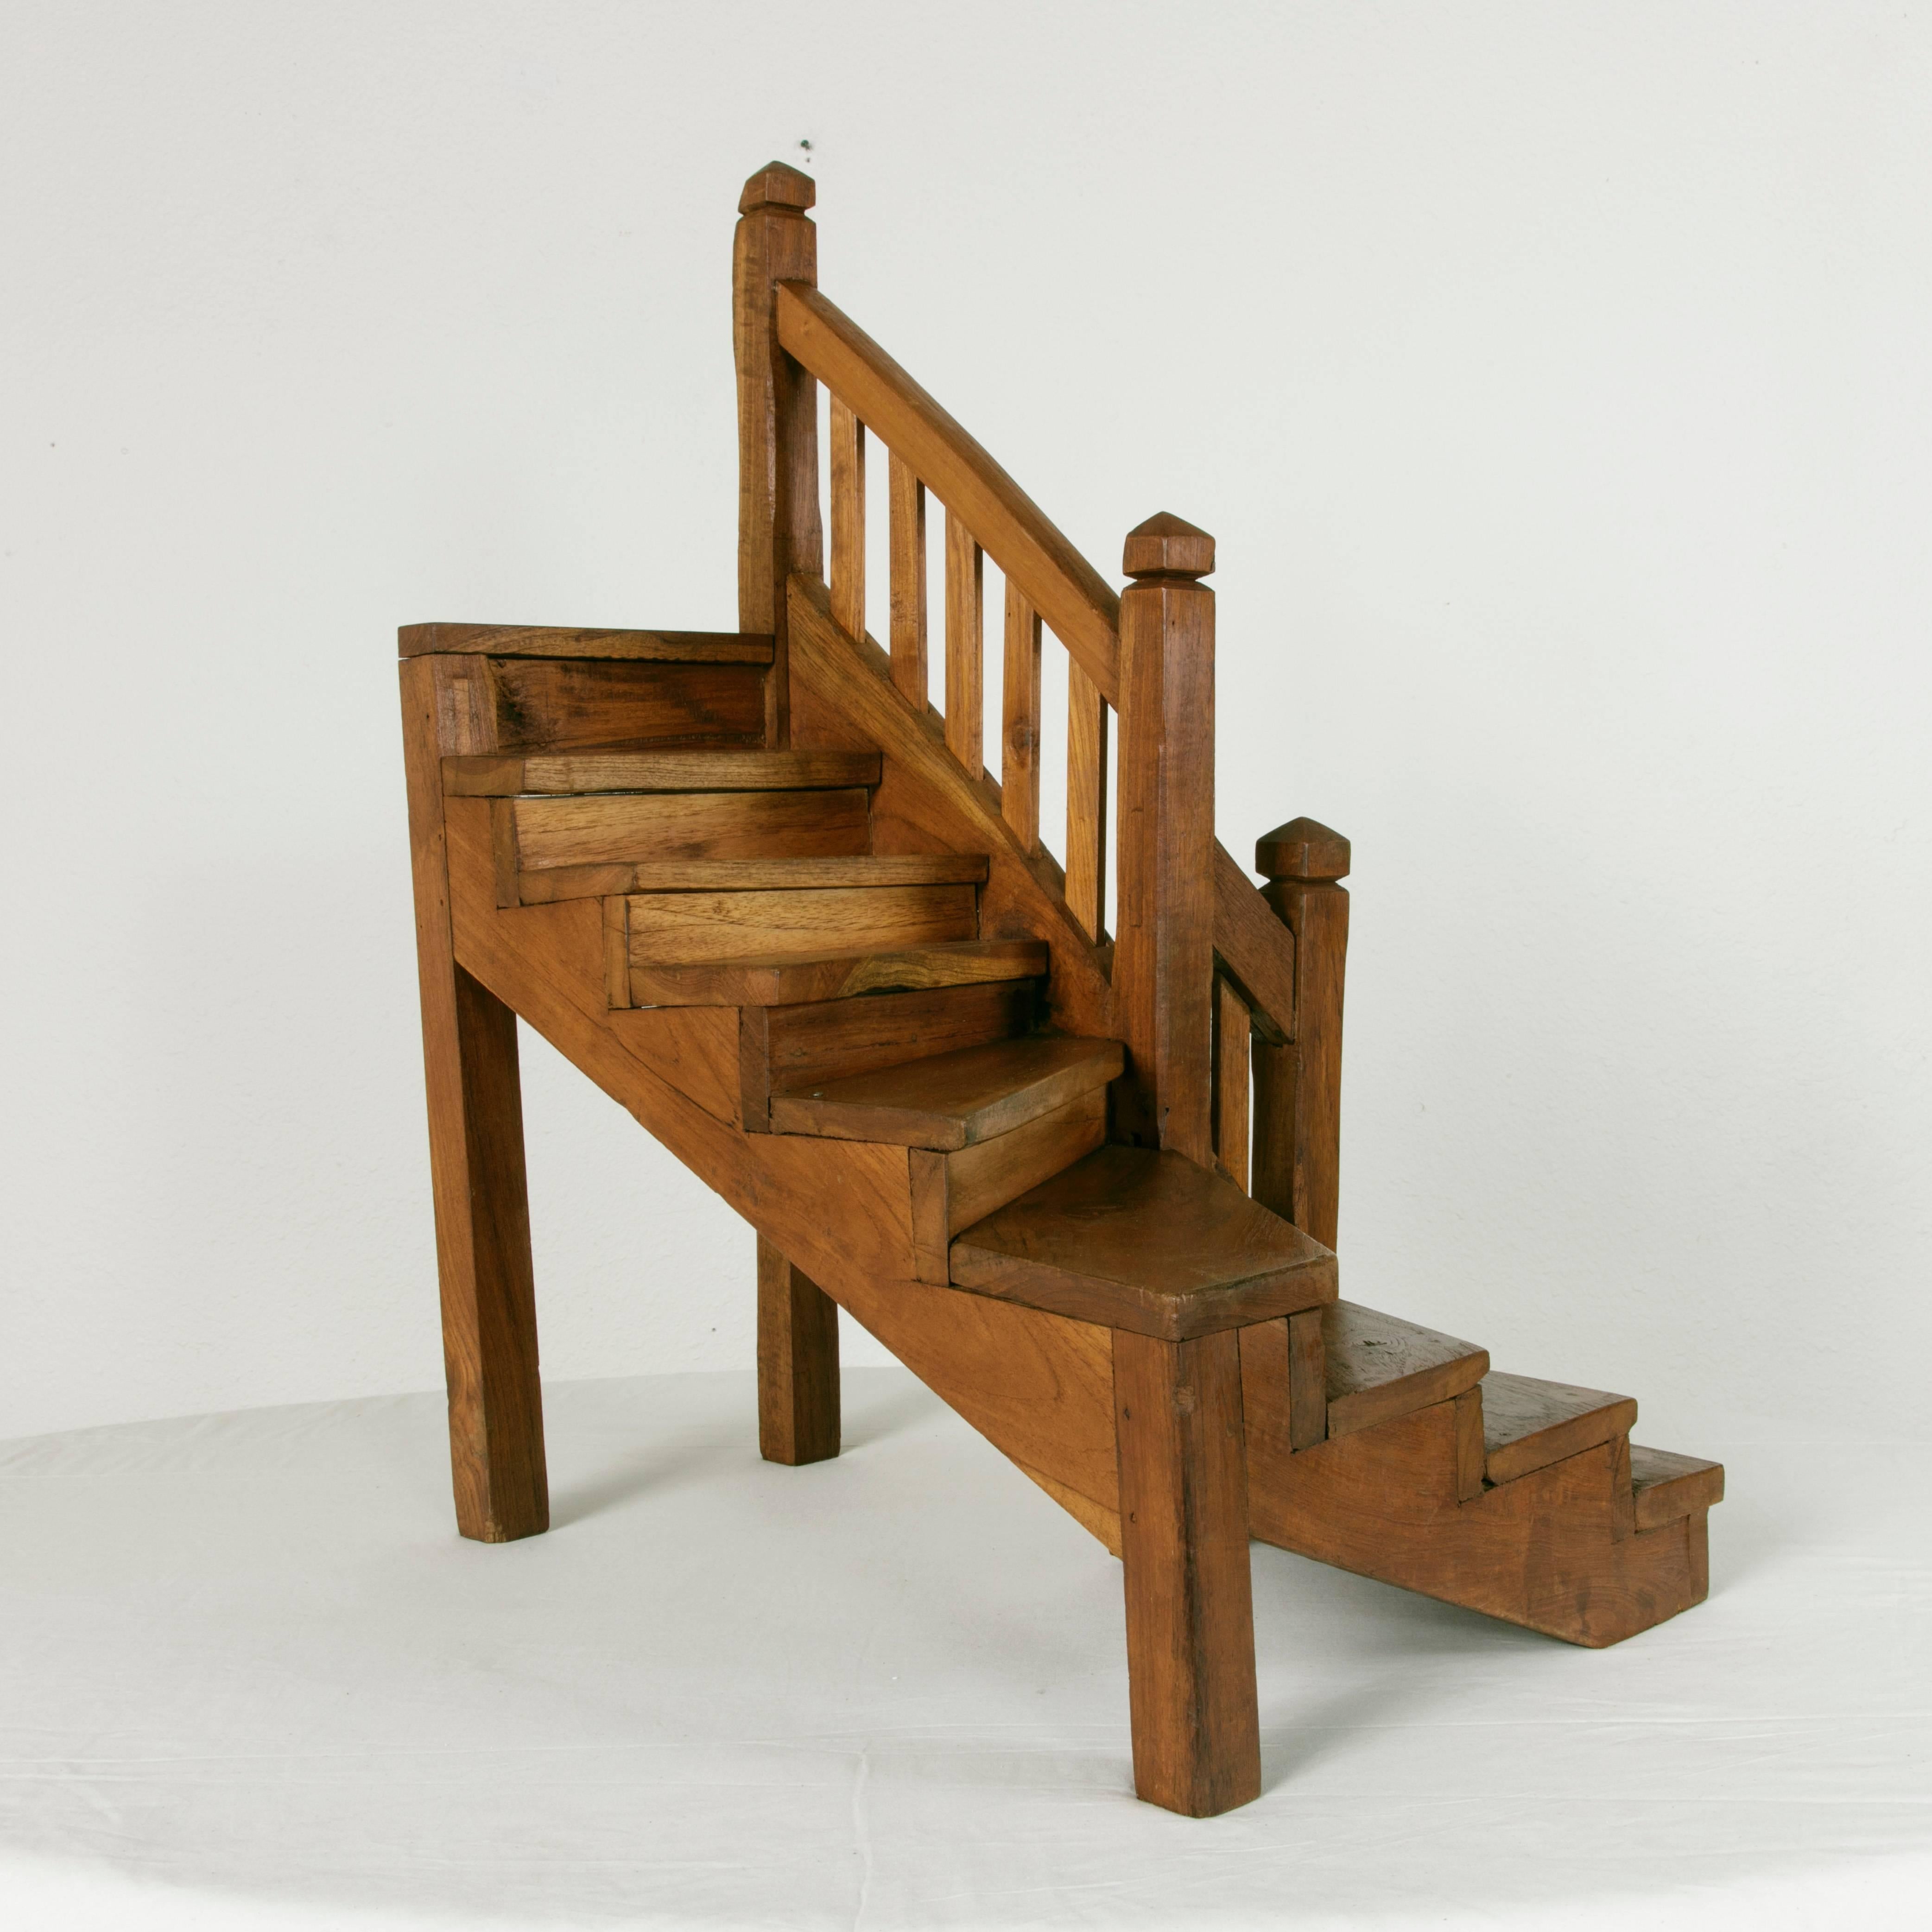 Early 20th Century Large Antique French Architect's Model of a Winding Staircase, Display Piece